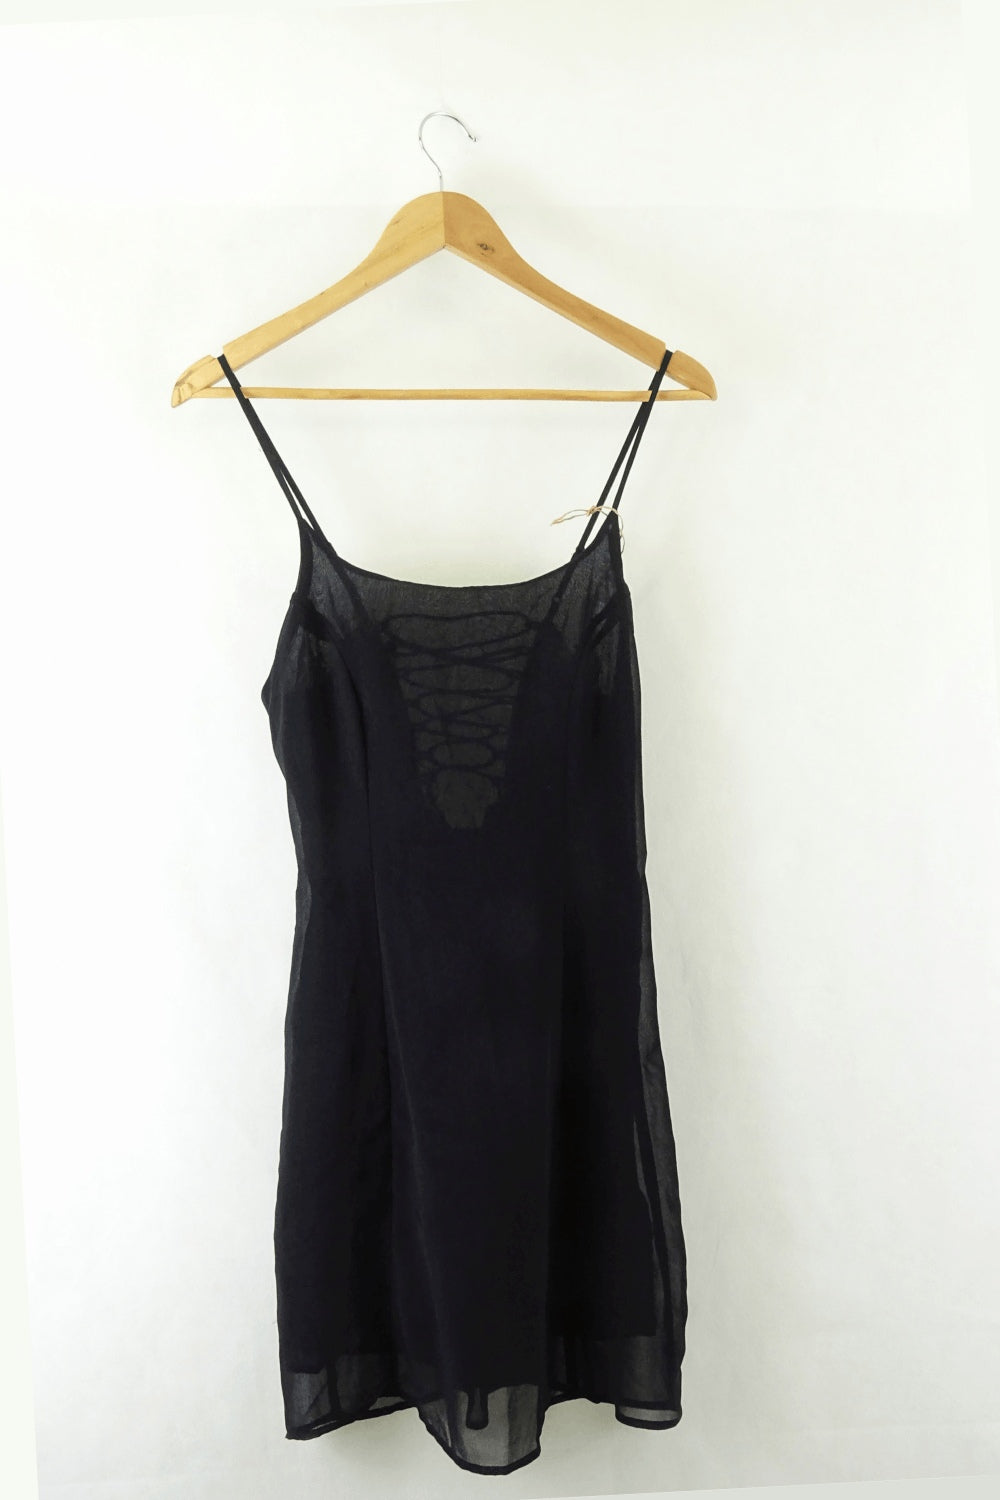 Urban Outfitters Black Strappy Dress 8